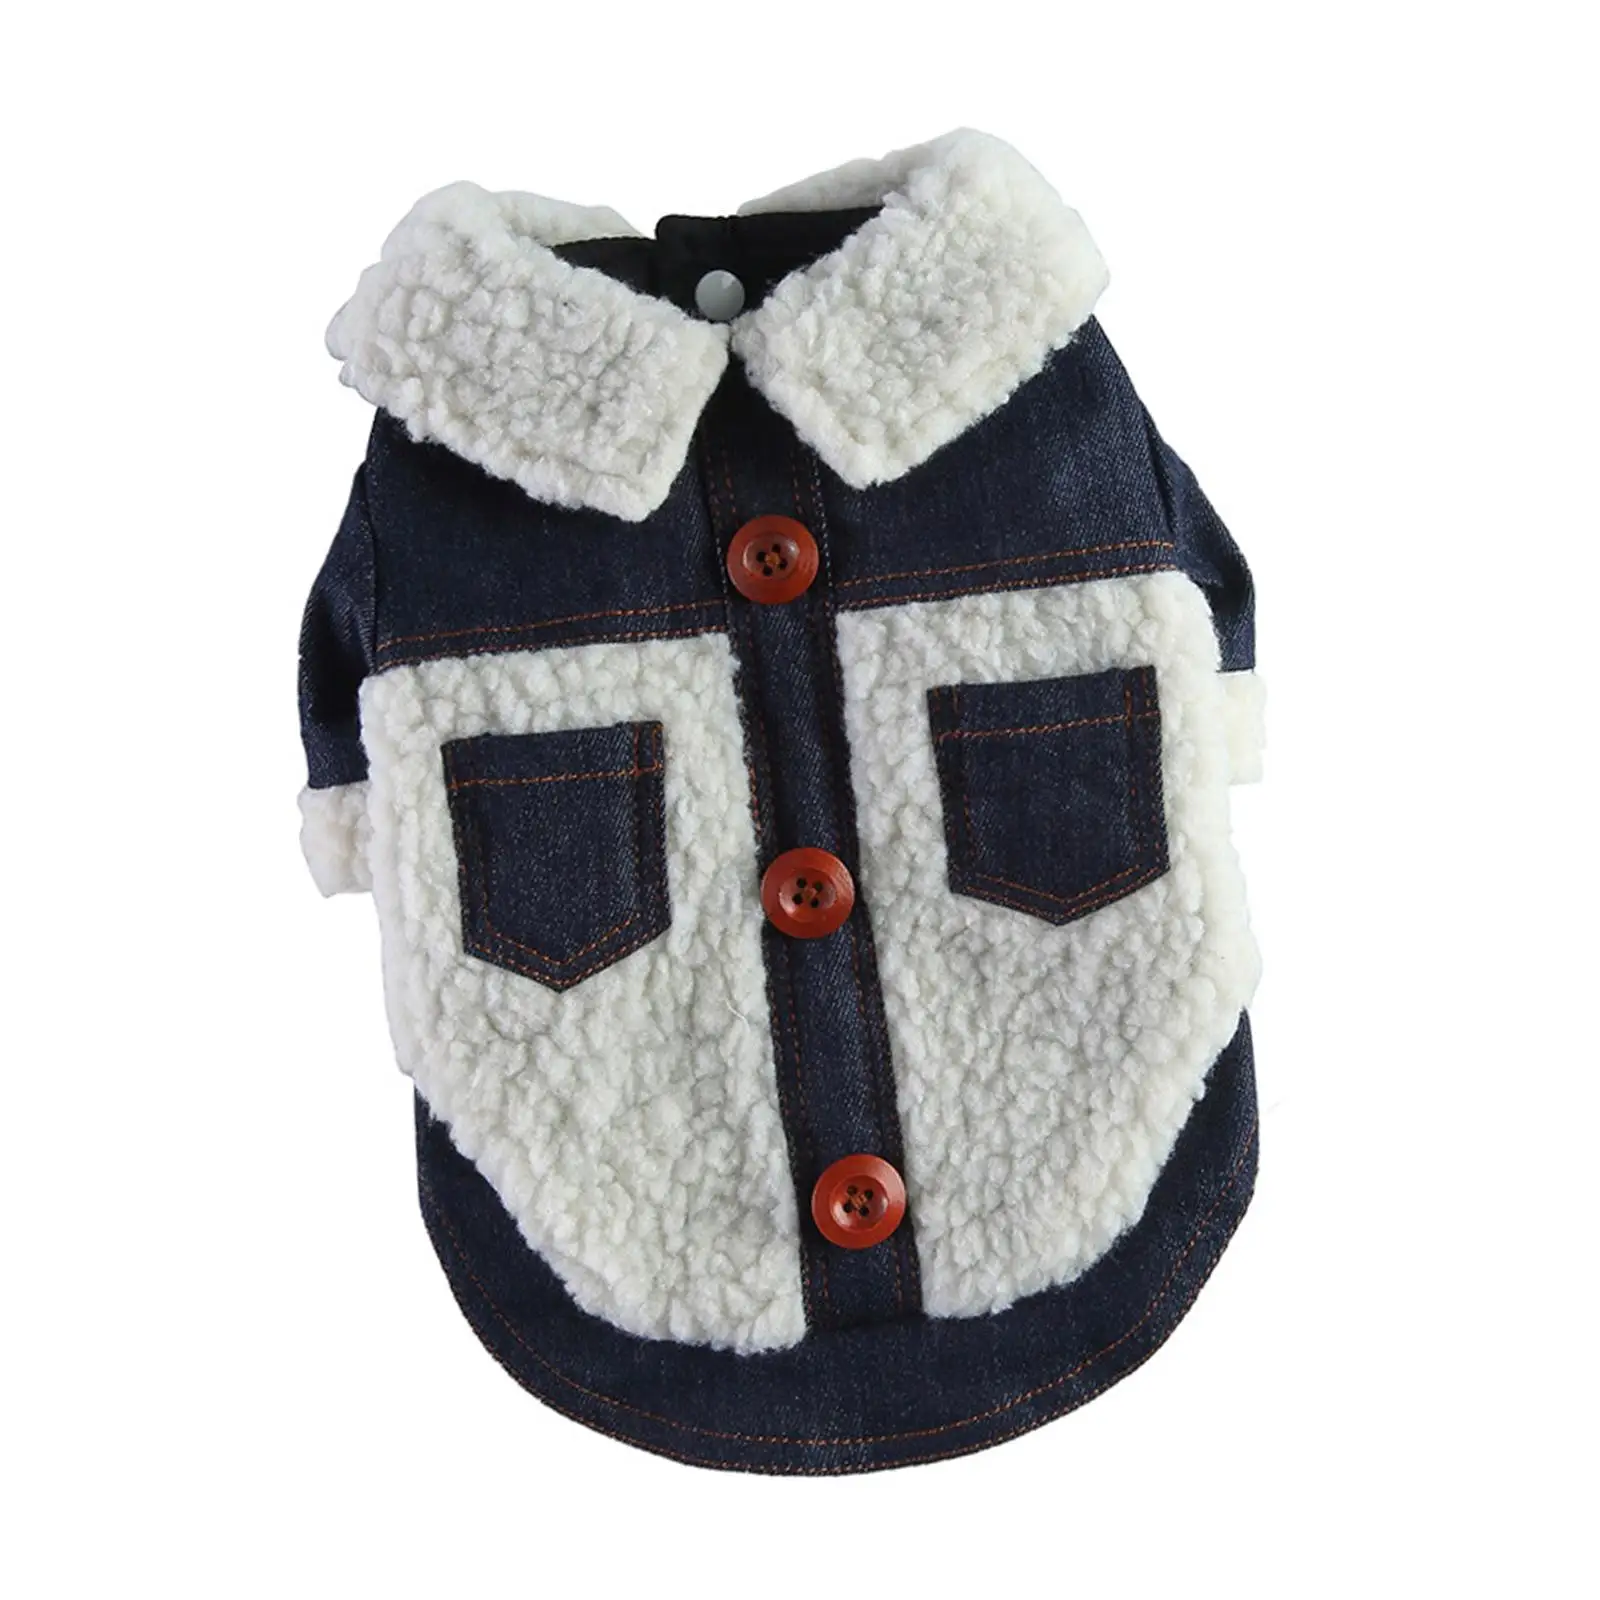 Denim Fleece dog Jacket with Pockets Puppy Jacket Pet Winter Clothes Fall Outfit for Walking Hiking Small Dogs Travel